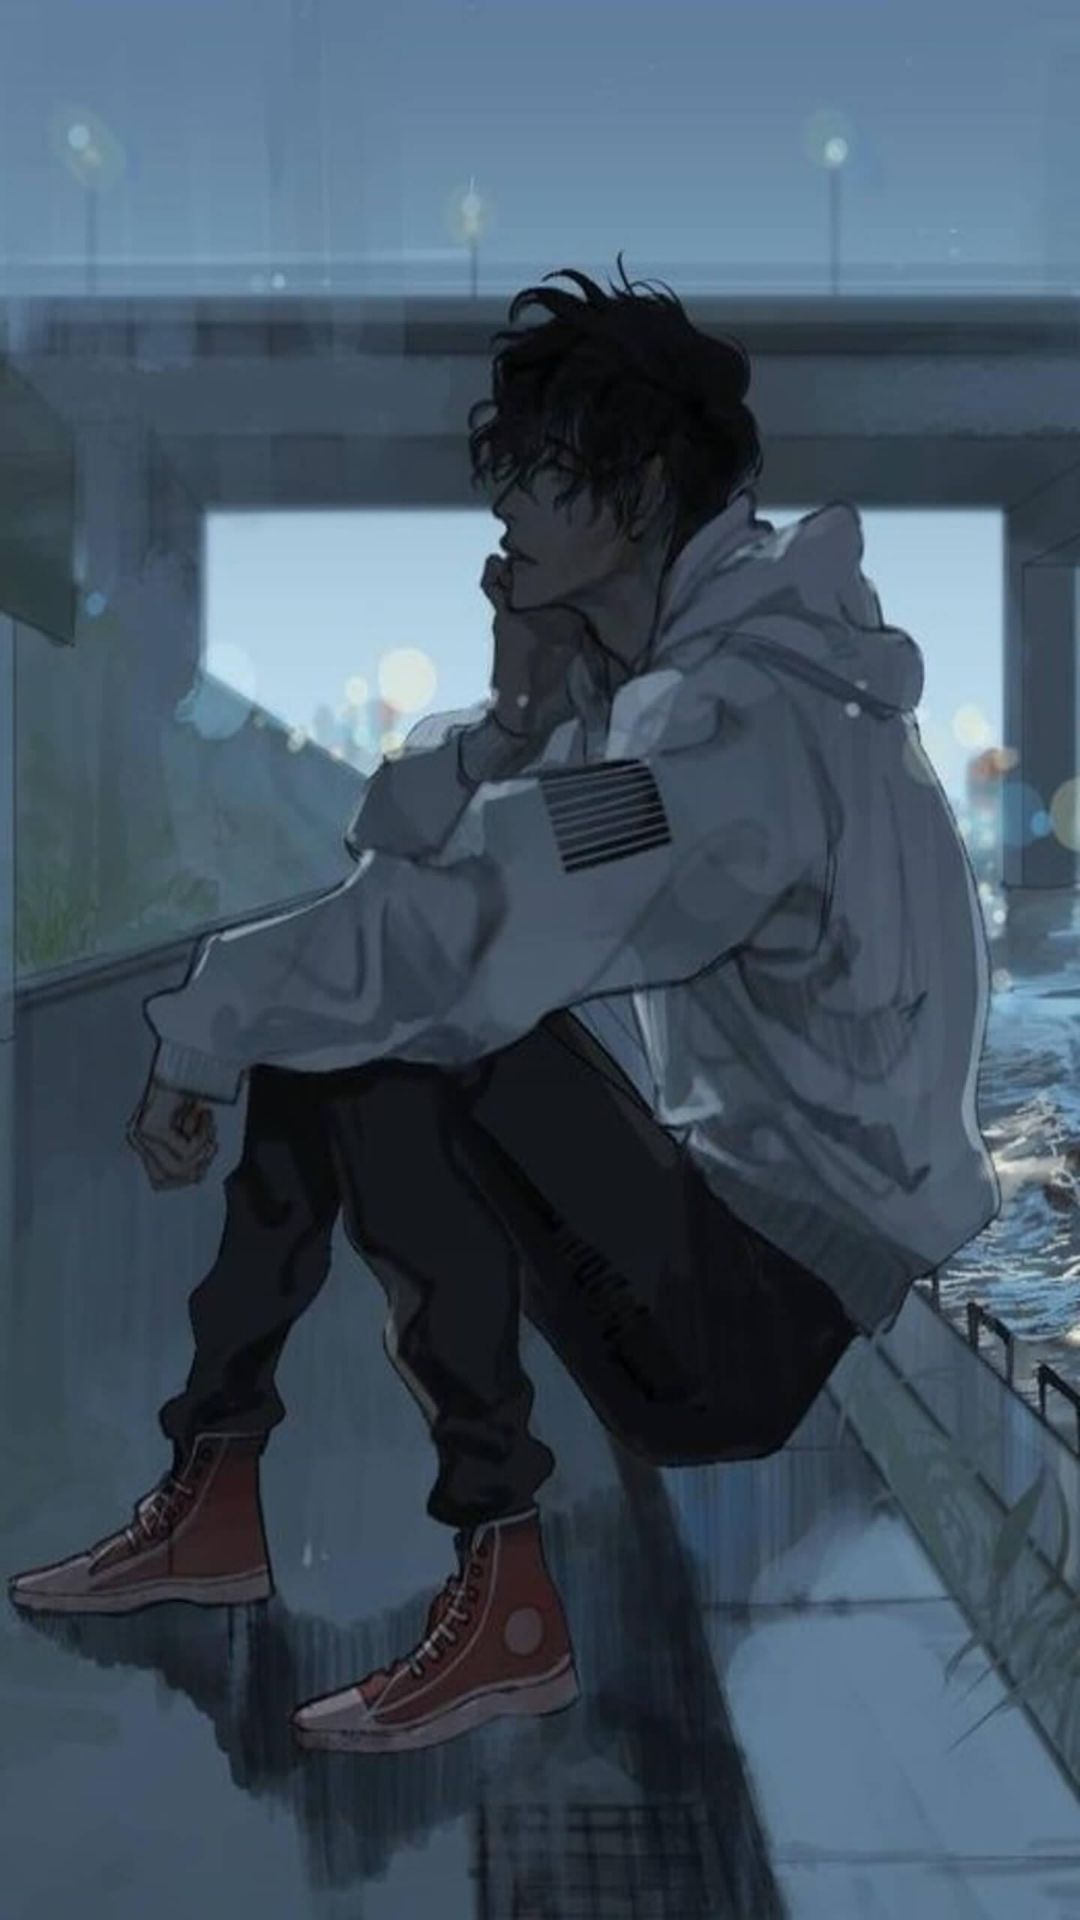 Depressed Anime Wallpaper HD For iPhone